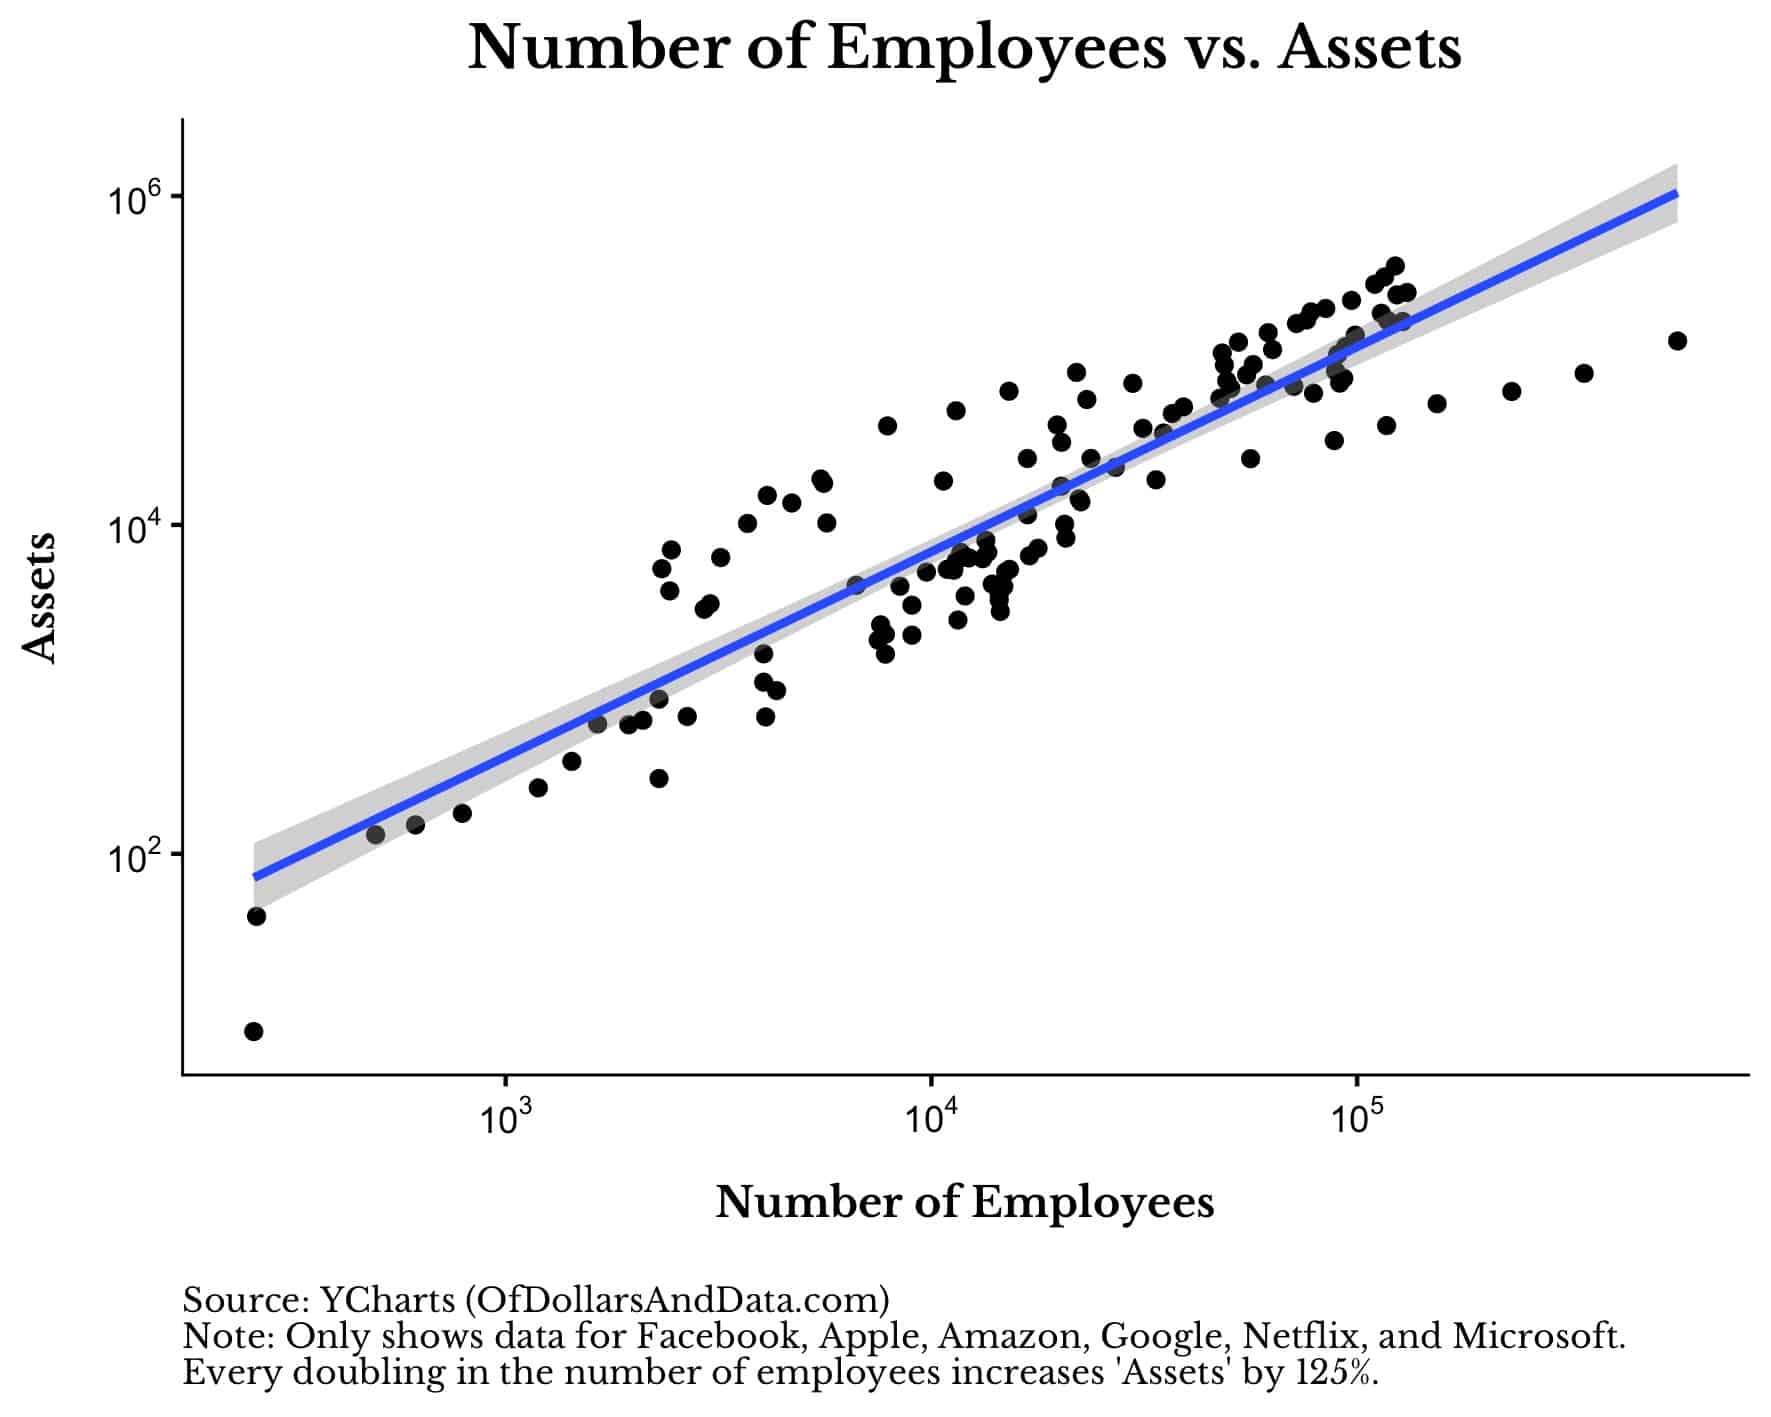 Number of employees vs assets for the FAANG companies.